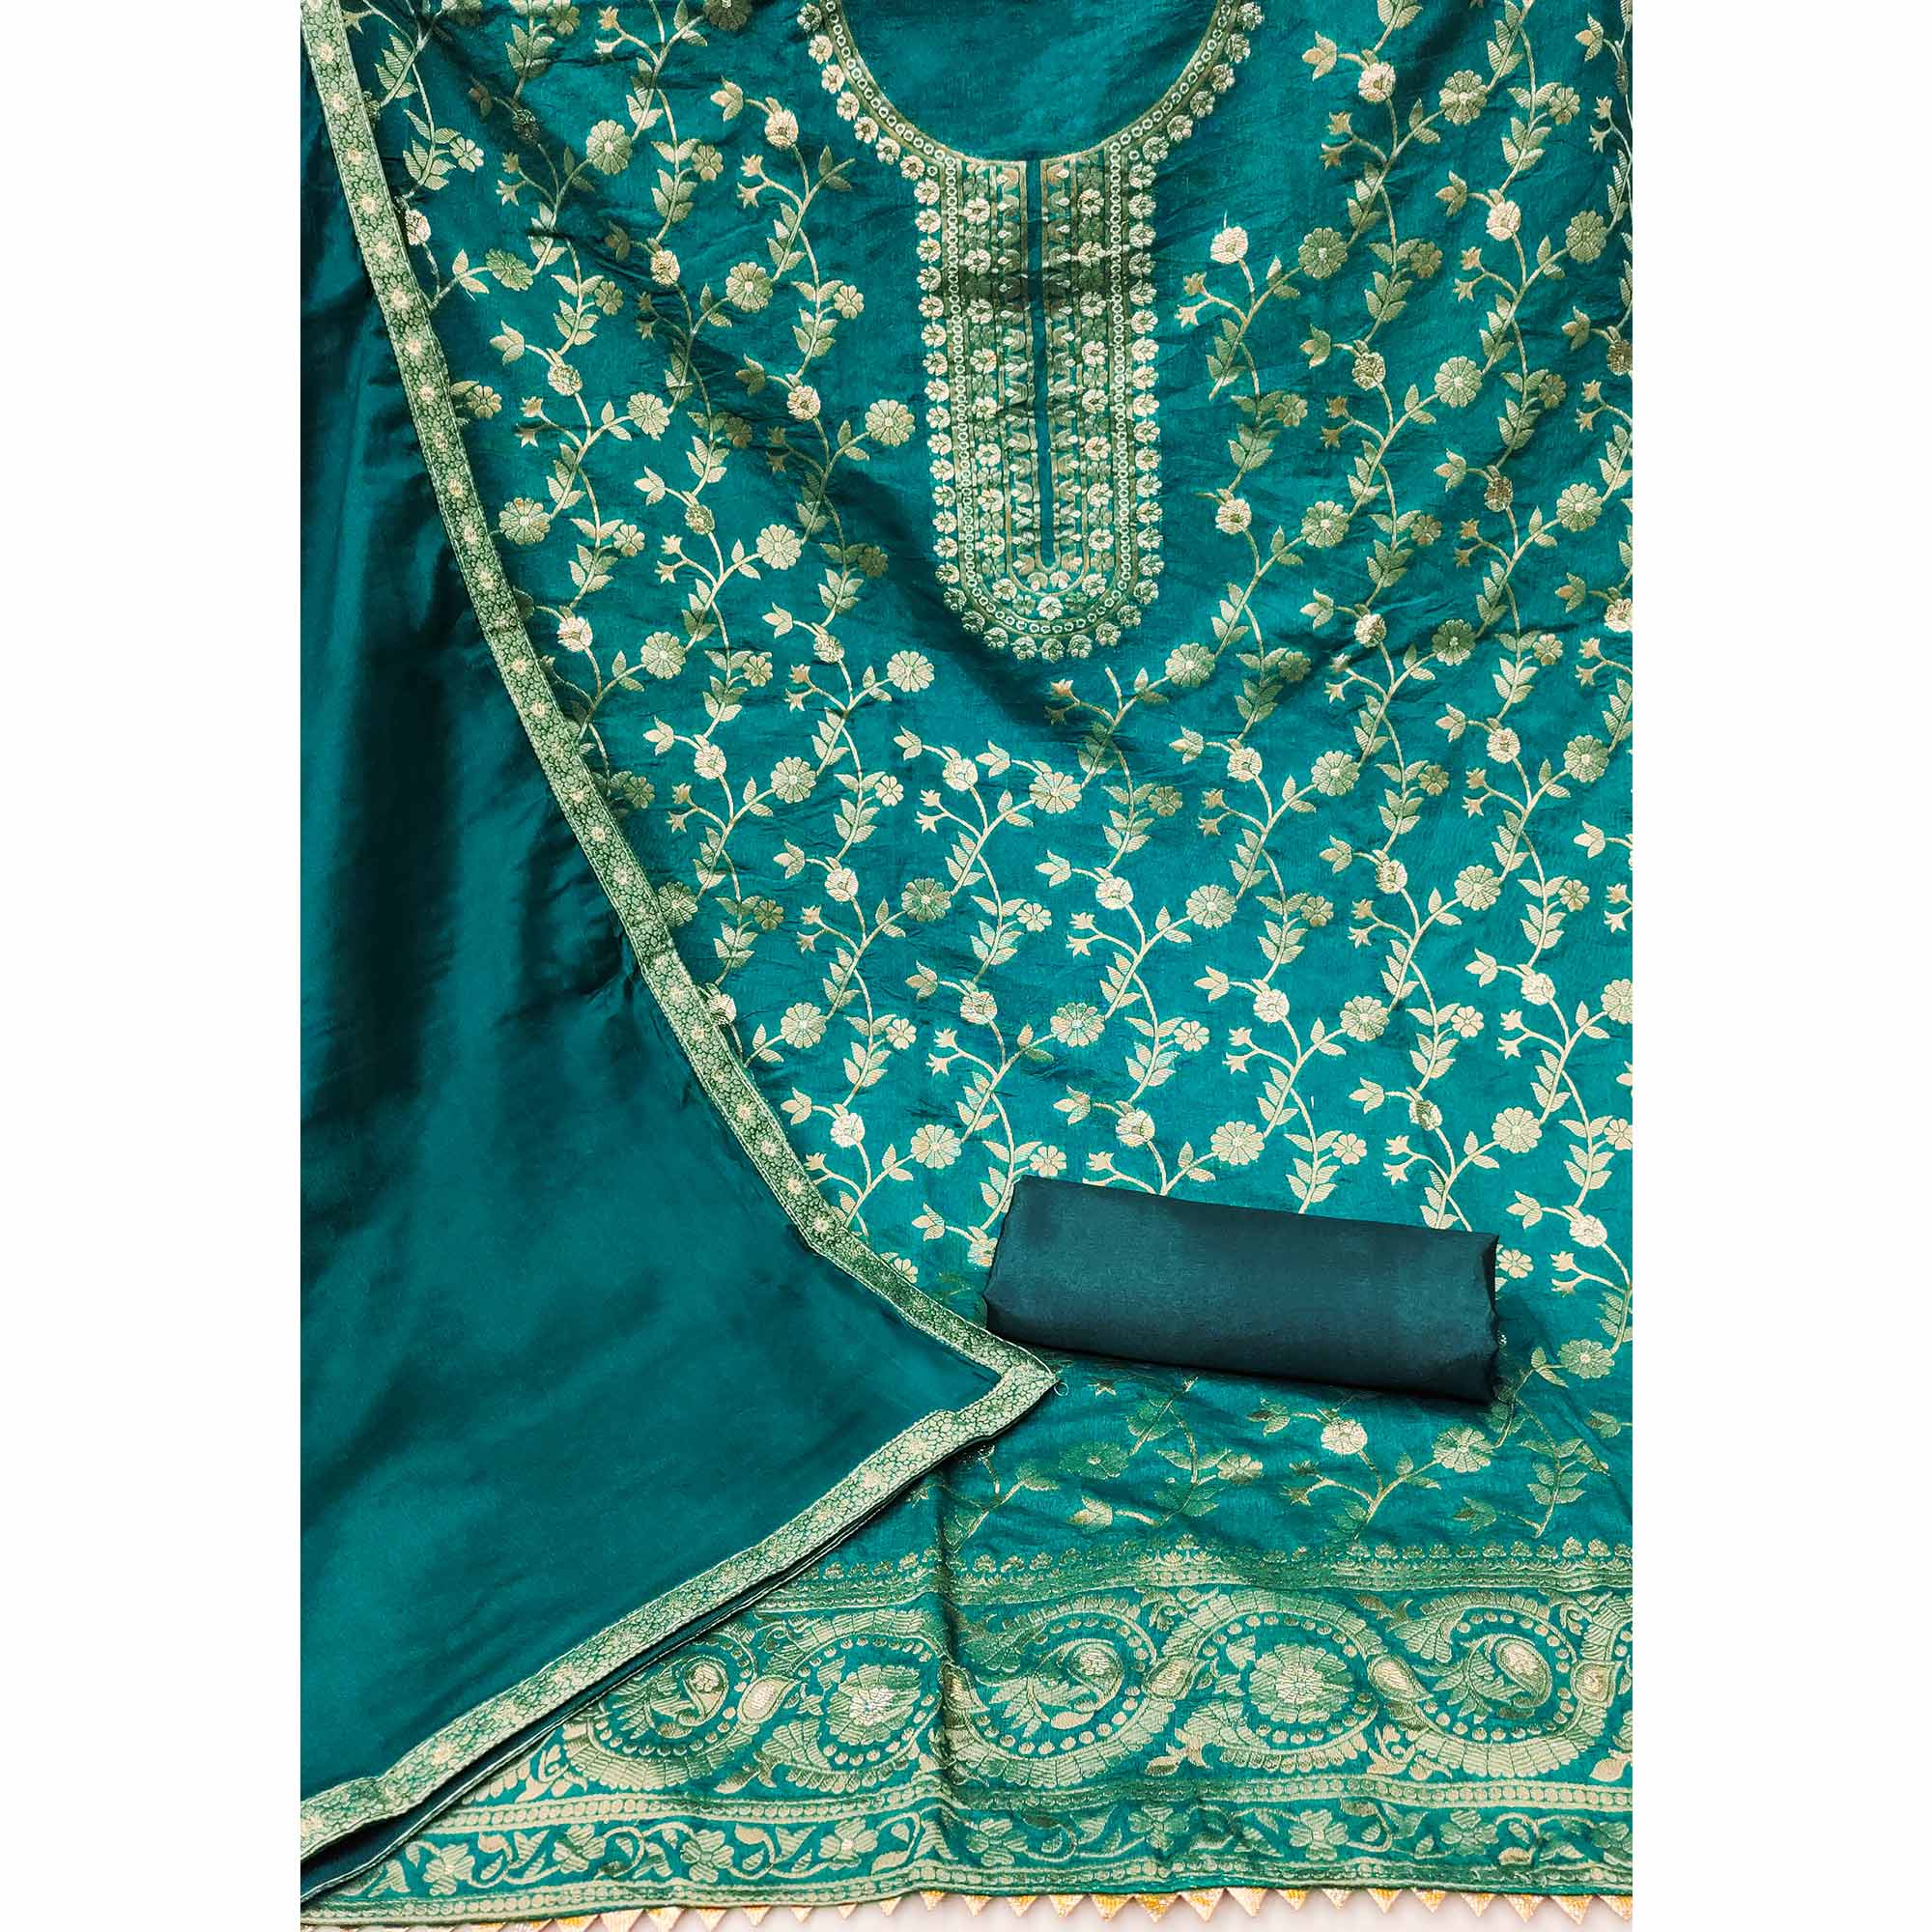 Teal Floral Woven Jacquard Dress Material